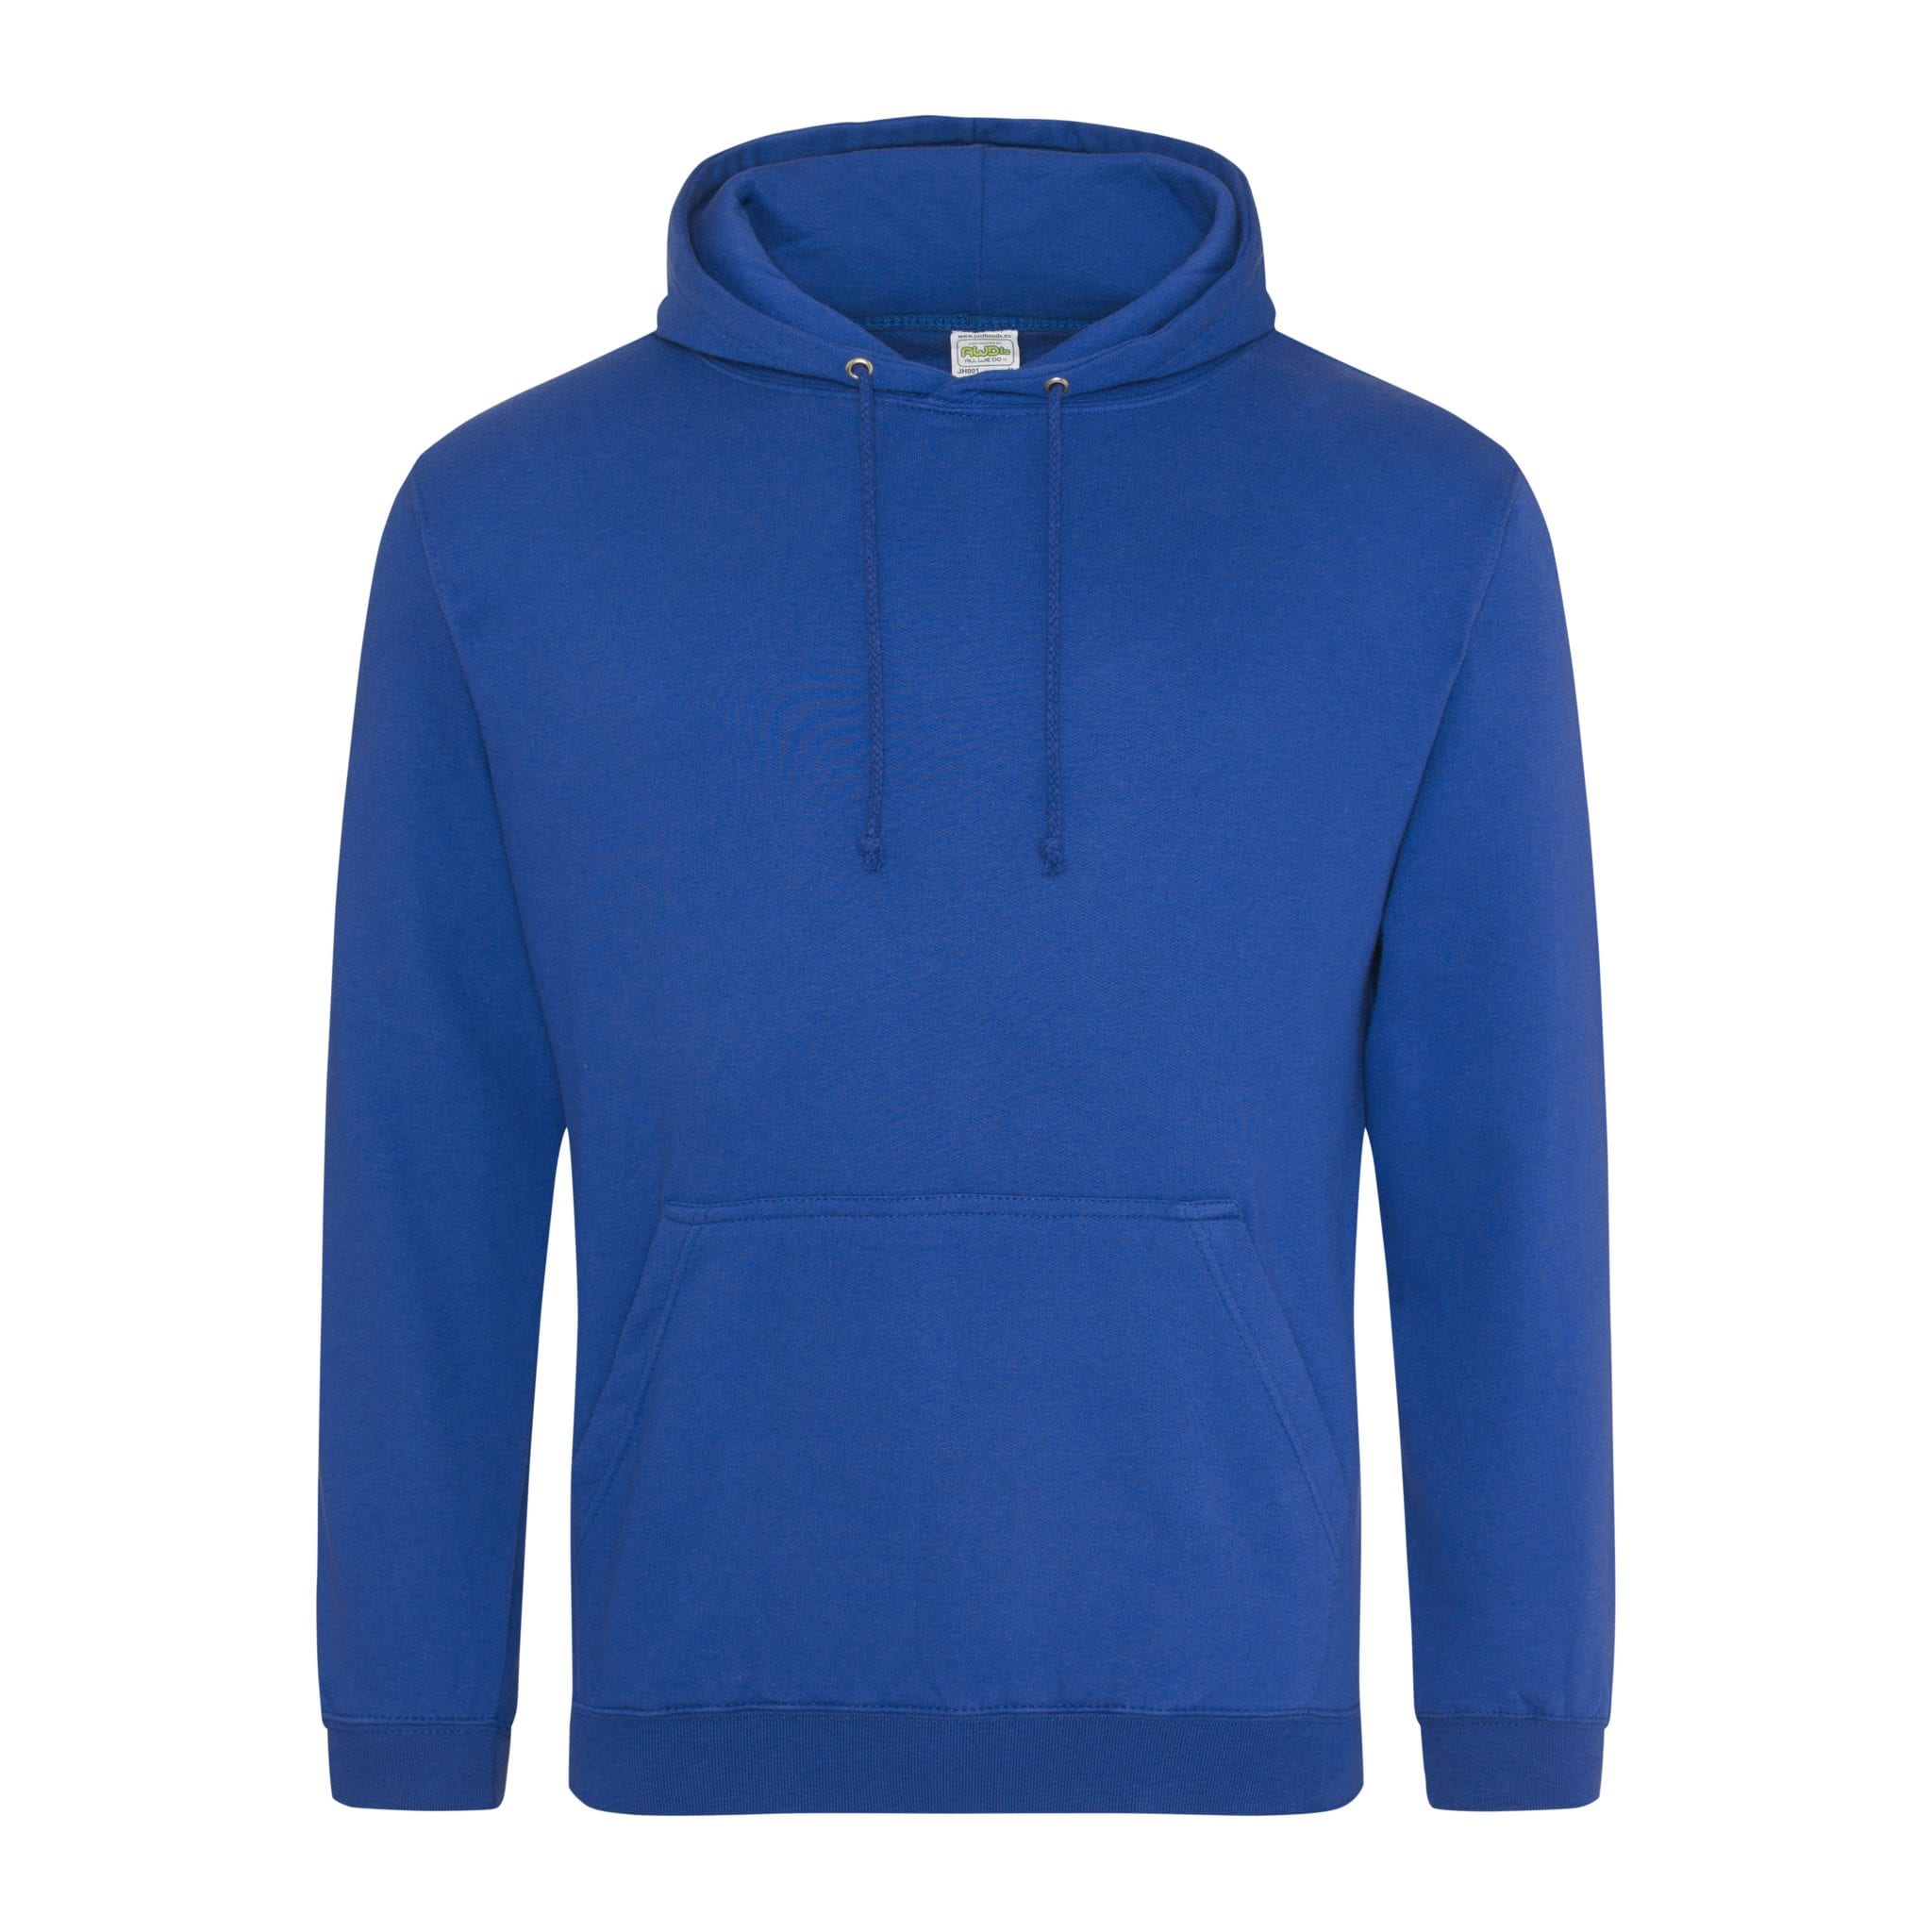 Leavers hoodie 23- Bookwell - Royal Only - Identity